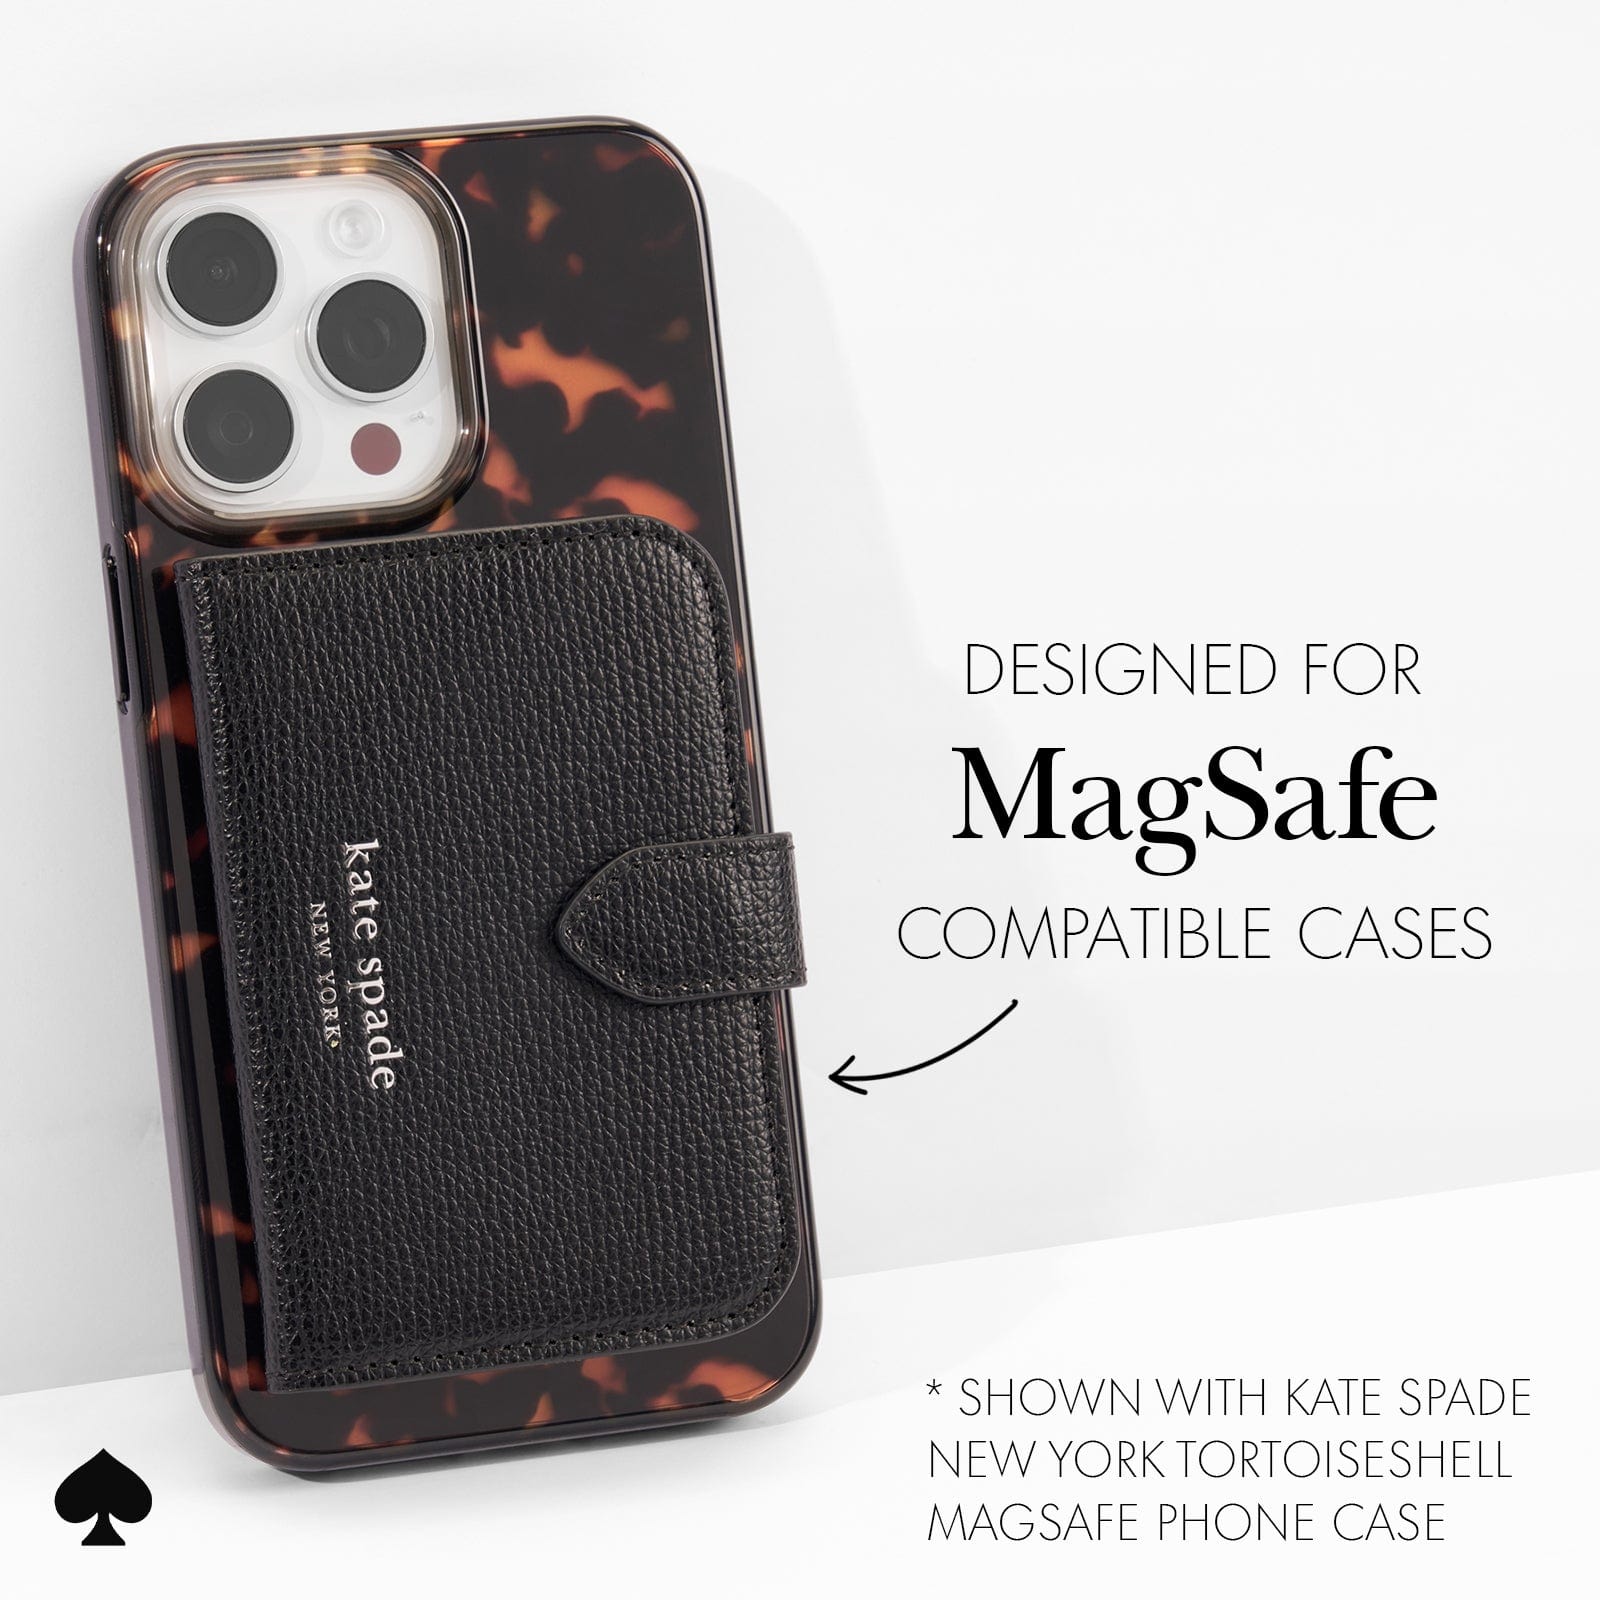 DESIGNED FOR MAGSAFE COMPATIBLE CASES. SHOWN WITH KATE SPADE NEW YORK TORTOISESHELL MAGSAFE PHONE CASE